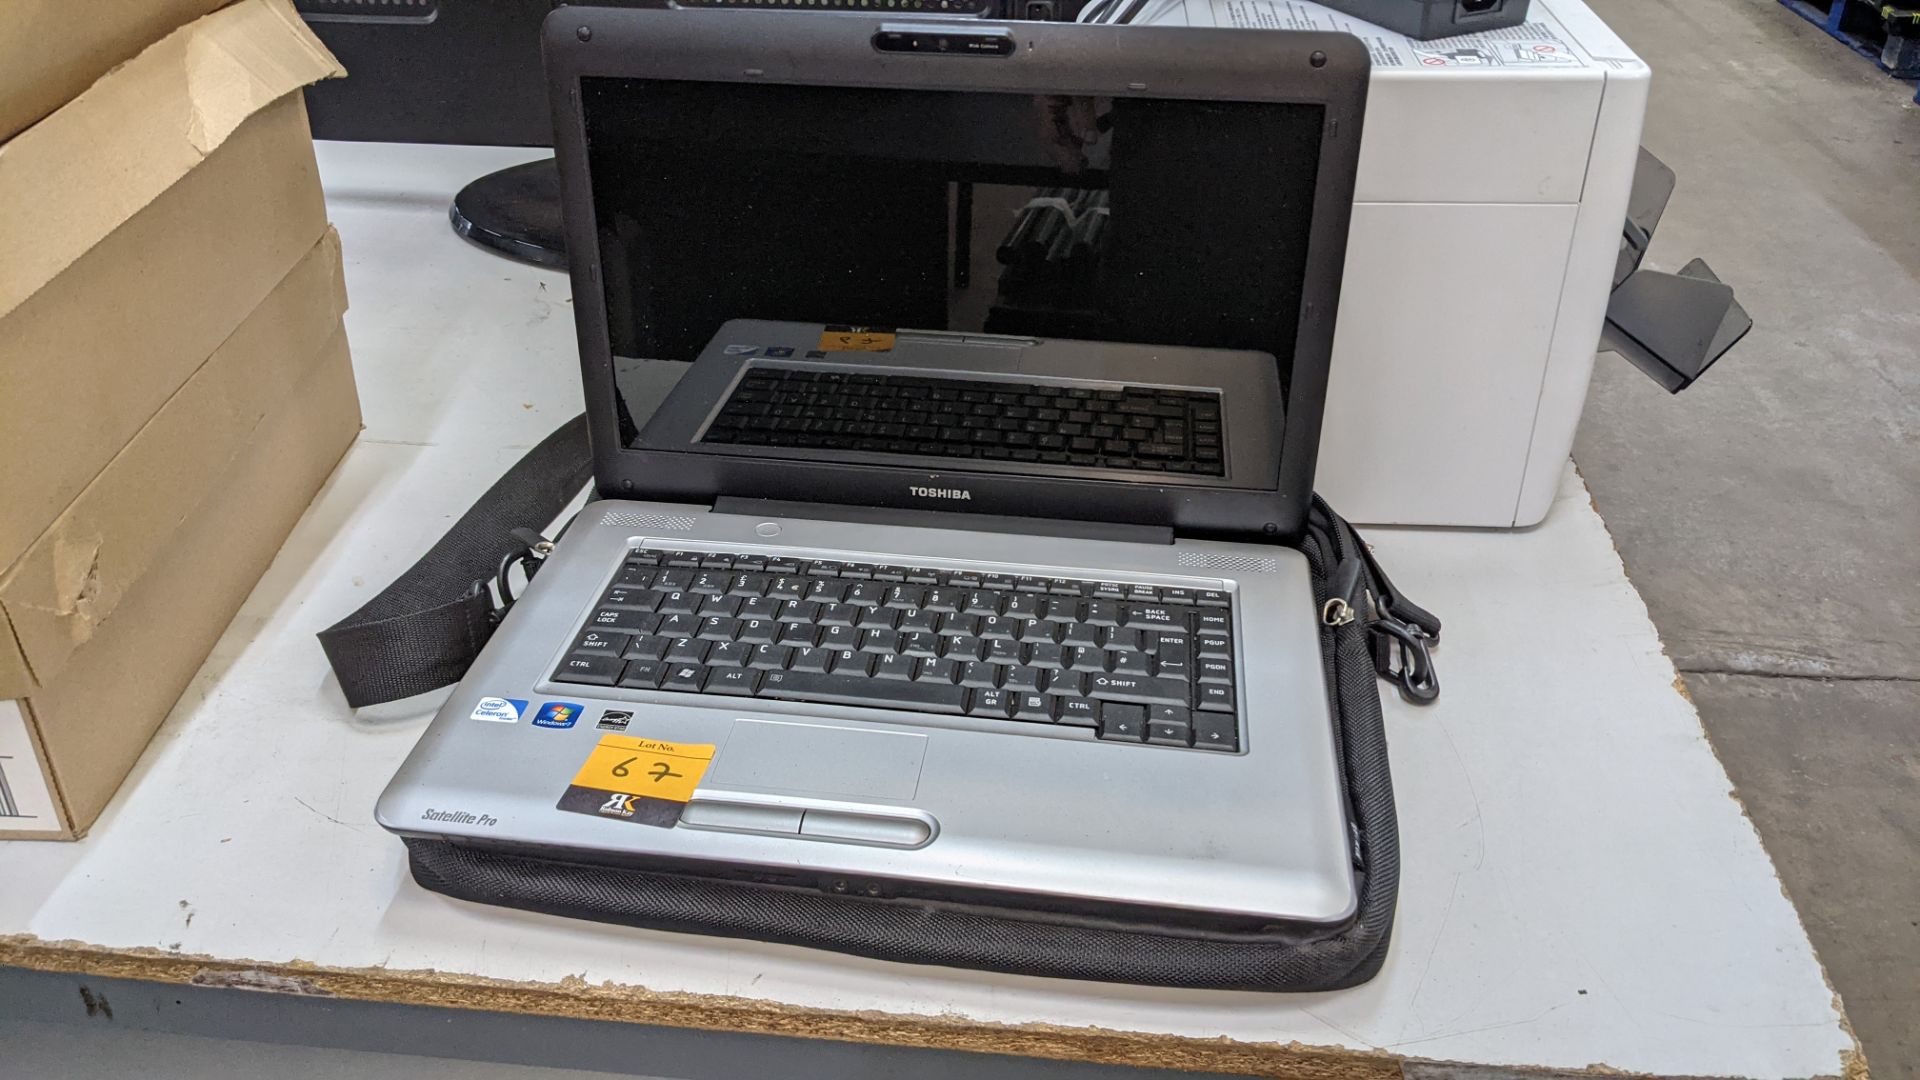 Toshiba Satellite Pro notebook computer including carry case - no power pack/charger - Image 2 of 8